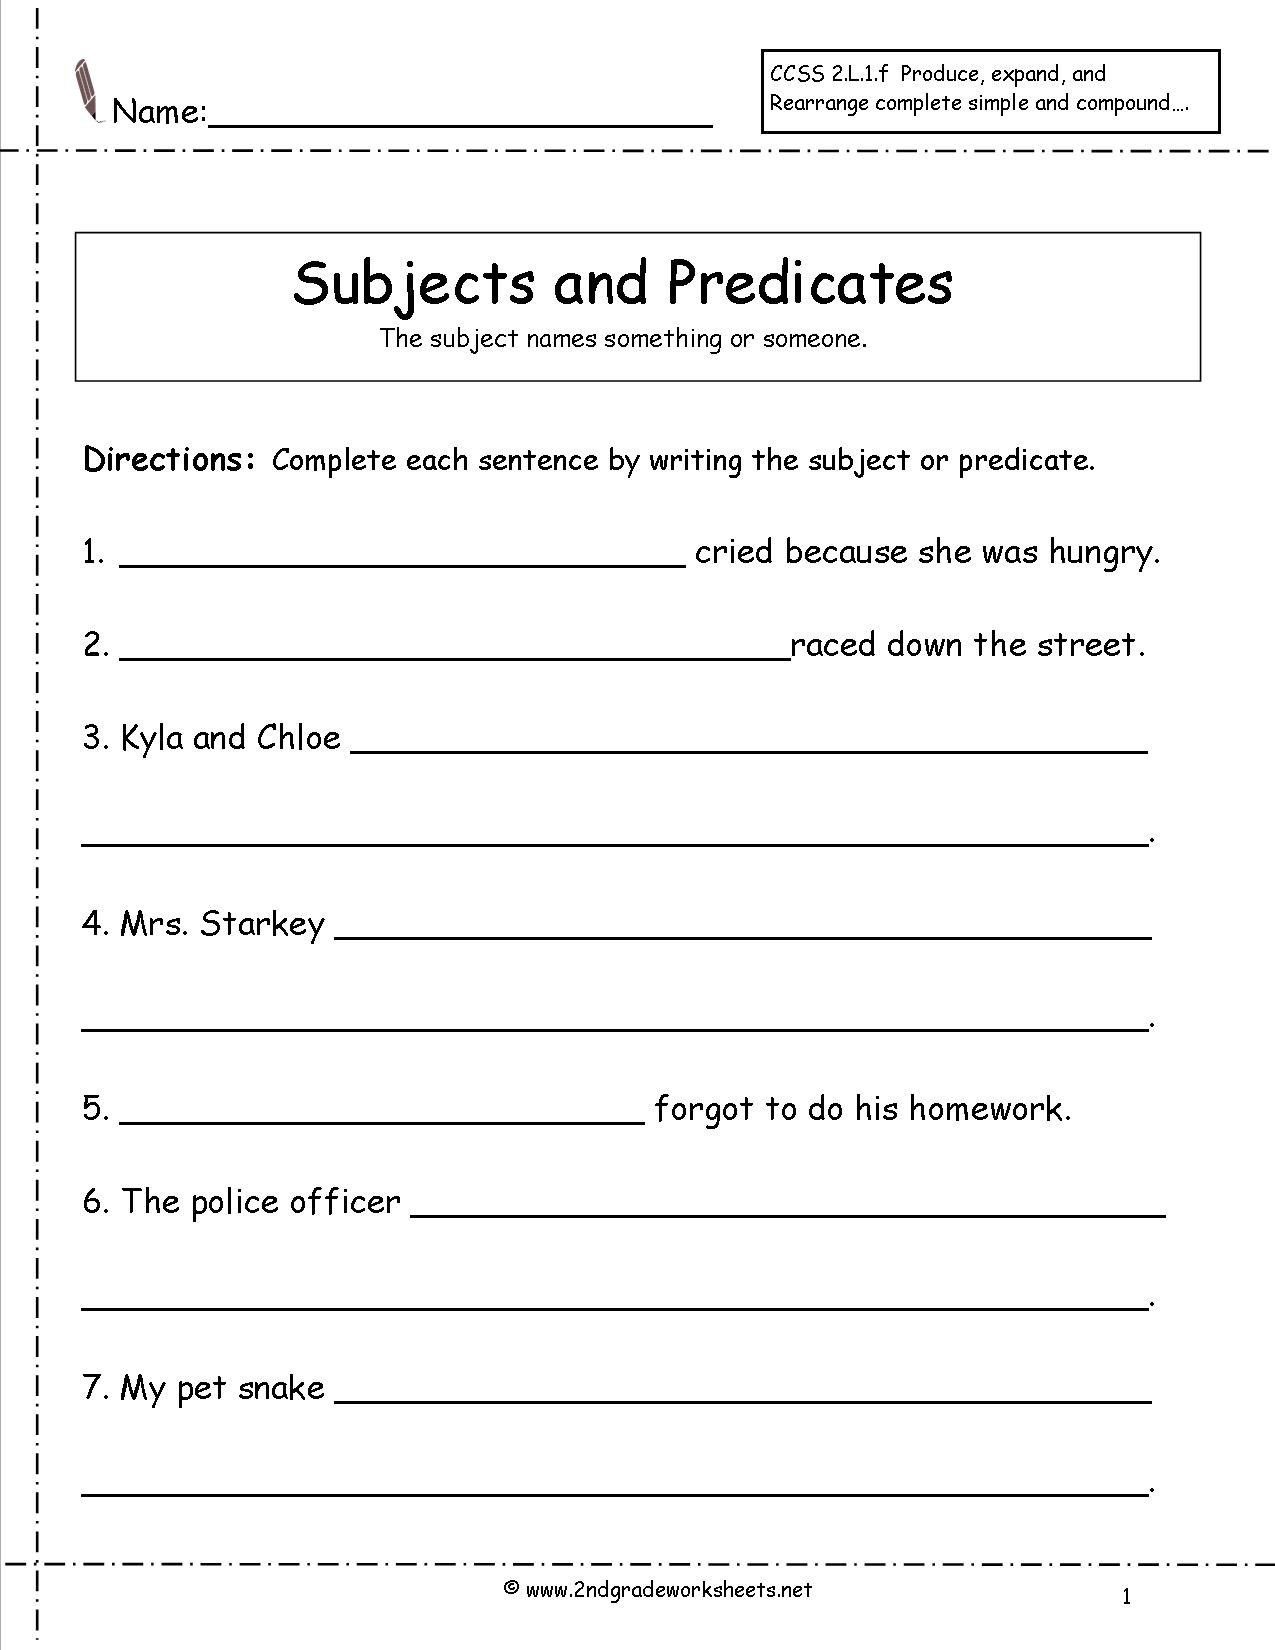 the-worksheet-for-an-english-speaking-activity-is-shown-in-black-and-white-which-includes